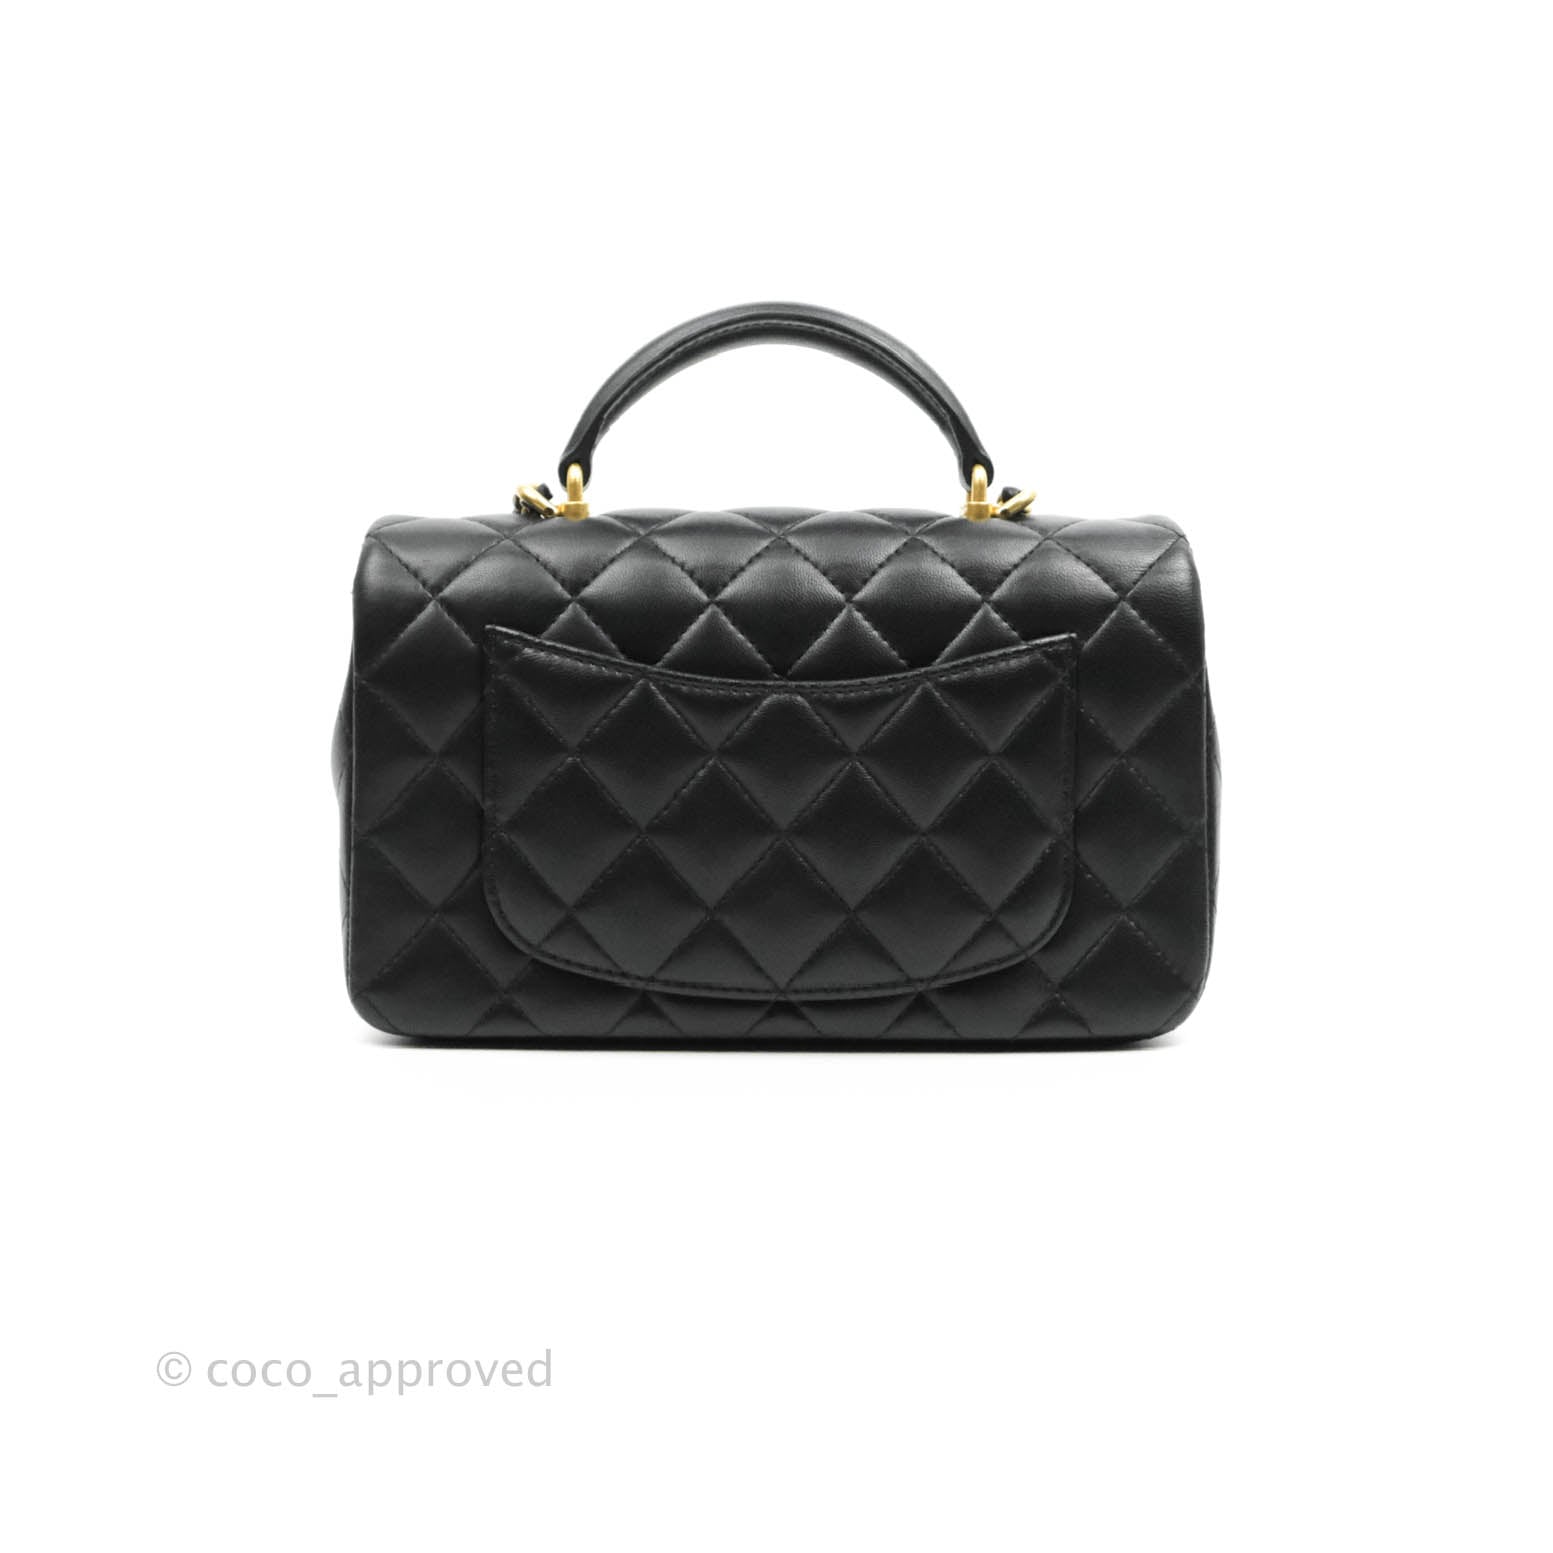 Black Chevron Flap Bag in Quilted Lambskin Leather with Gold tone Hardware,  2014, Handbags & Accessories, 2021